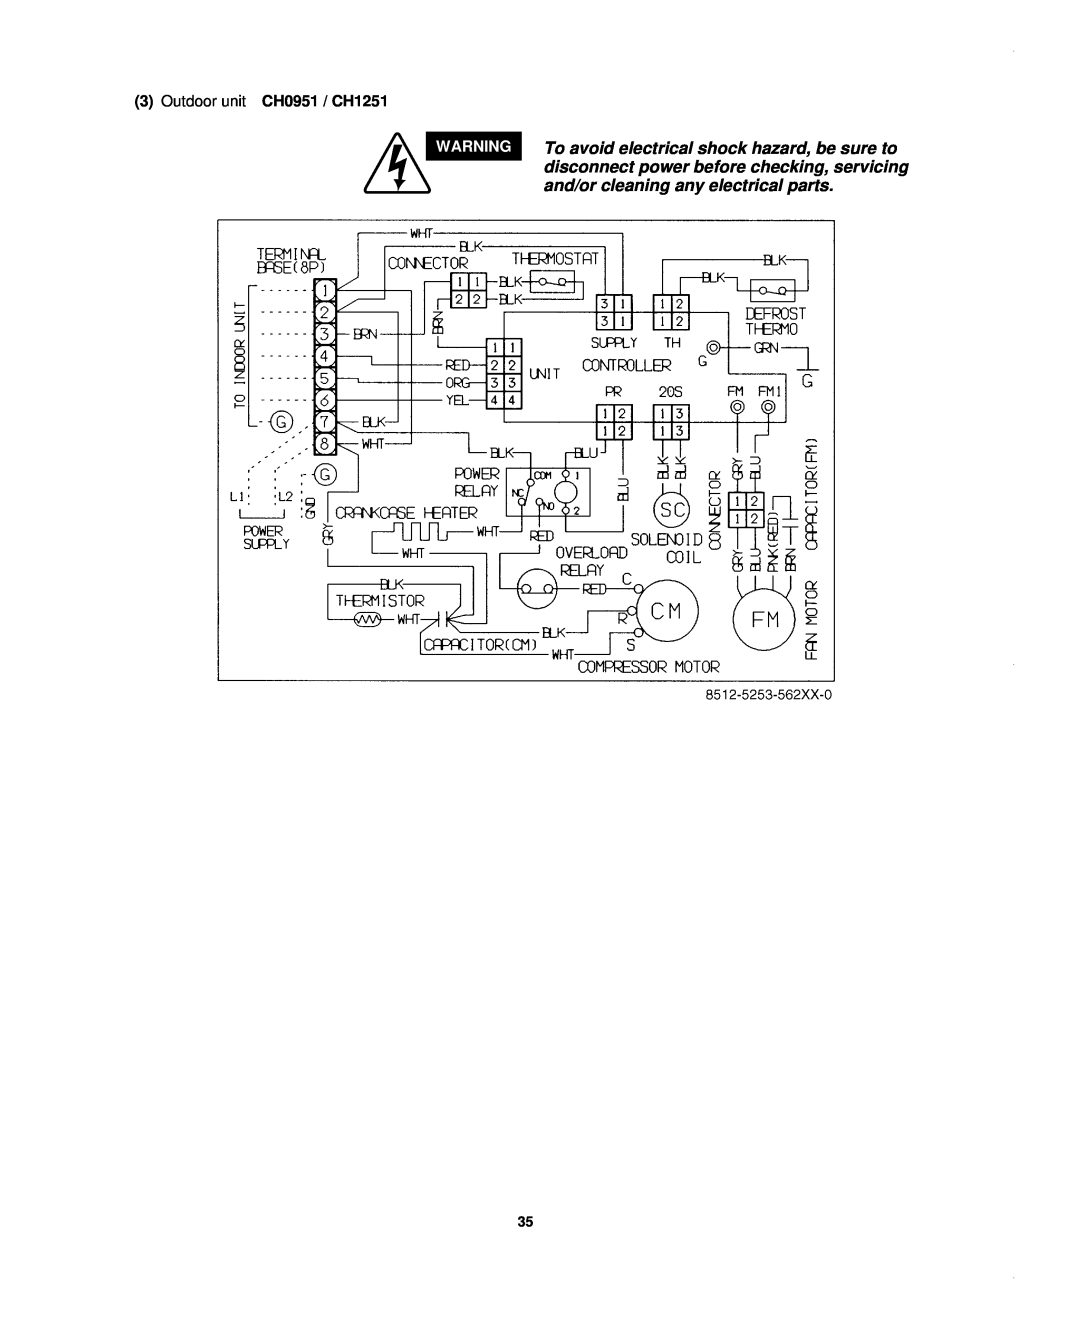 Sanyo CH1852, CH0952, KHS1852-S To avoid electrical shock hazard, be sure to, disconnect power before checking, servicing 